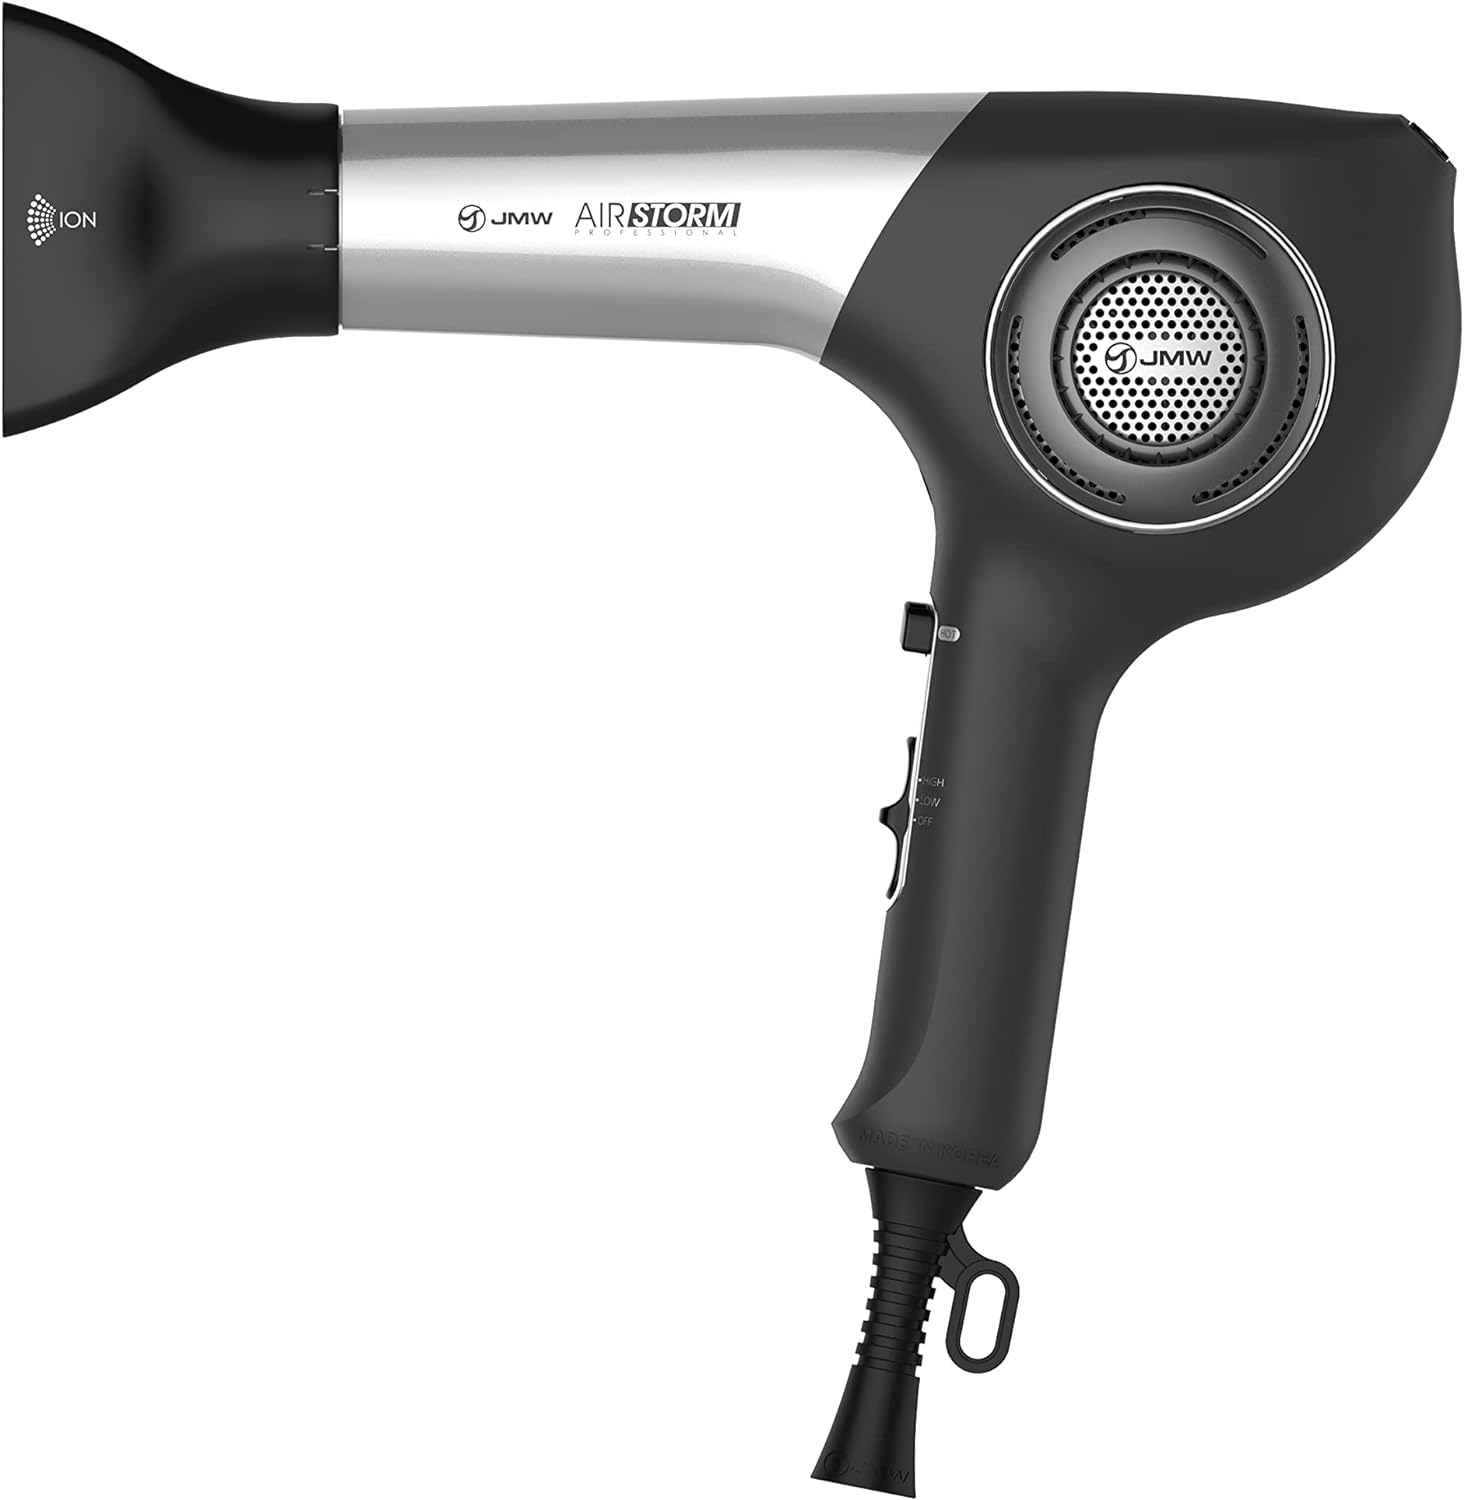 JMW AIR Storm Professional Hair Dryer - Ionic Ceramic, Lightweight, Quiet, Low Noise, Durable, Silent Blow Dryer, Best Powerful 1600W for Fast Drying